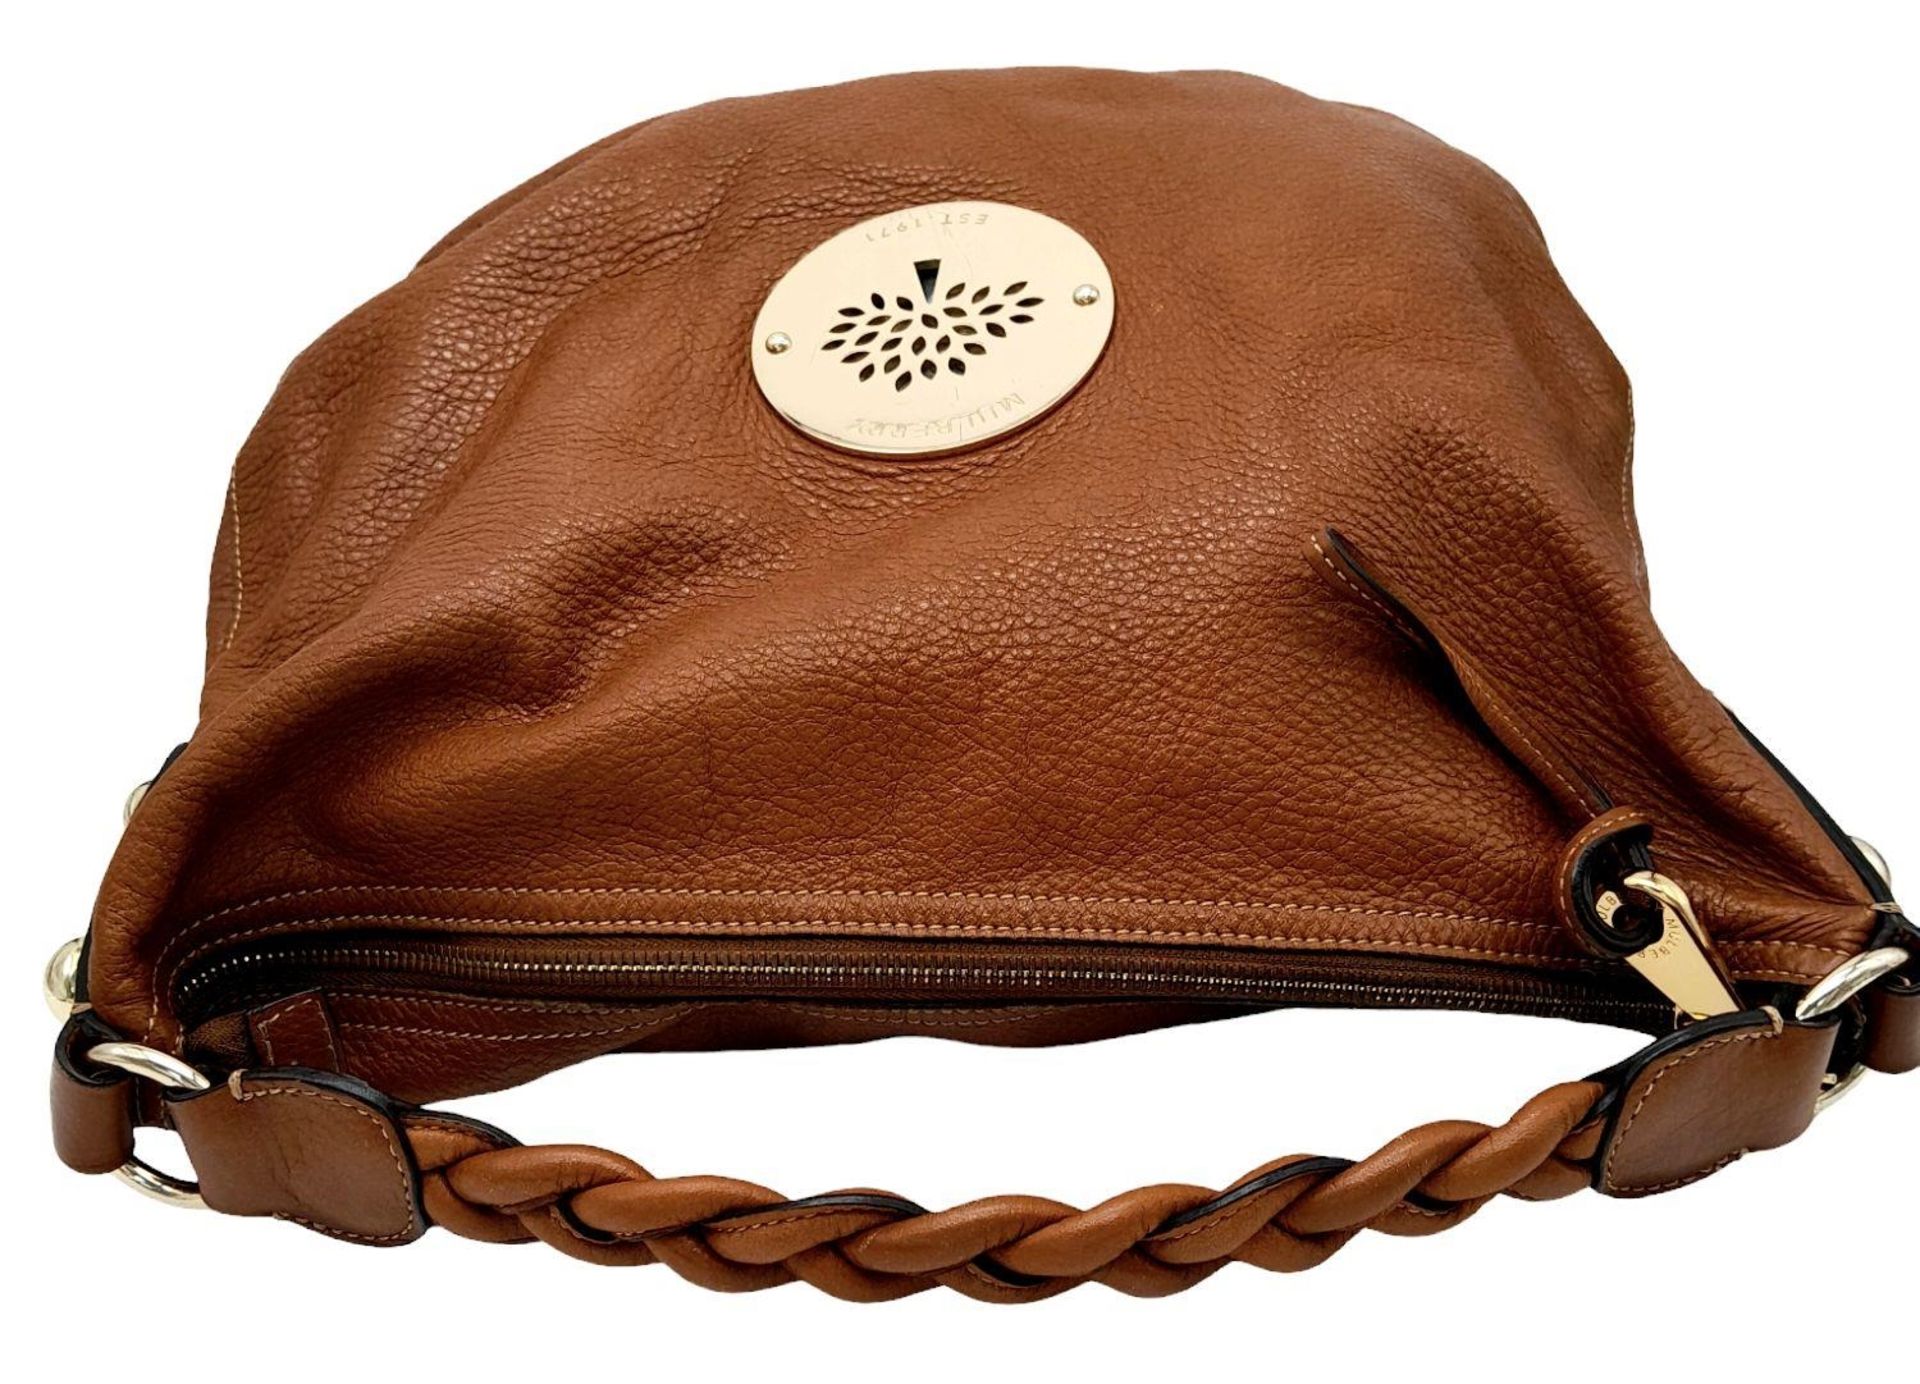 A Mulberry Tan Daria Hobo Bag. Leather exterior with gold-toned hardware, braided strap and zip - Image 3 of 8